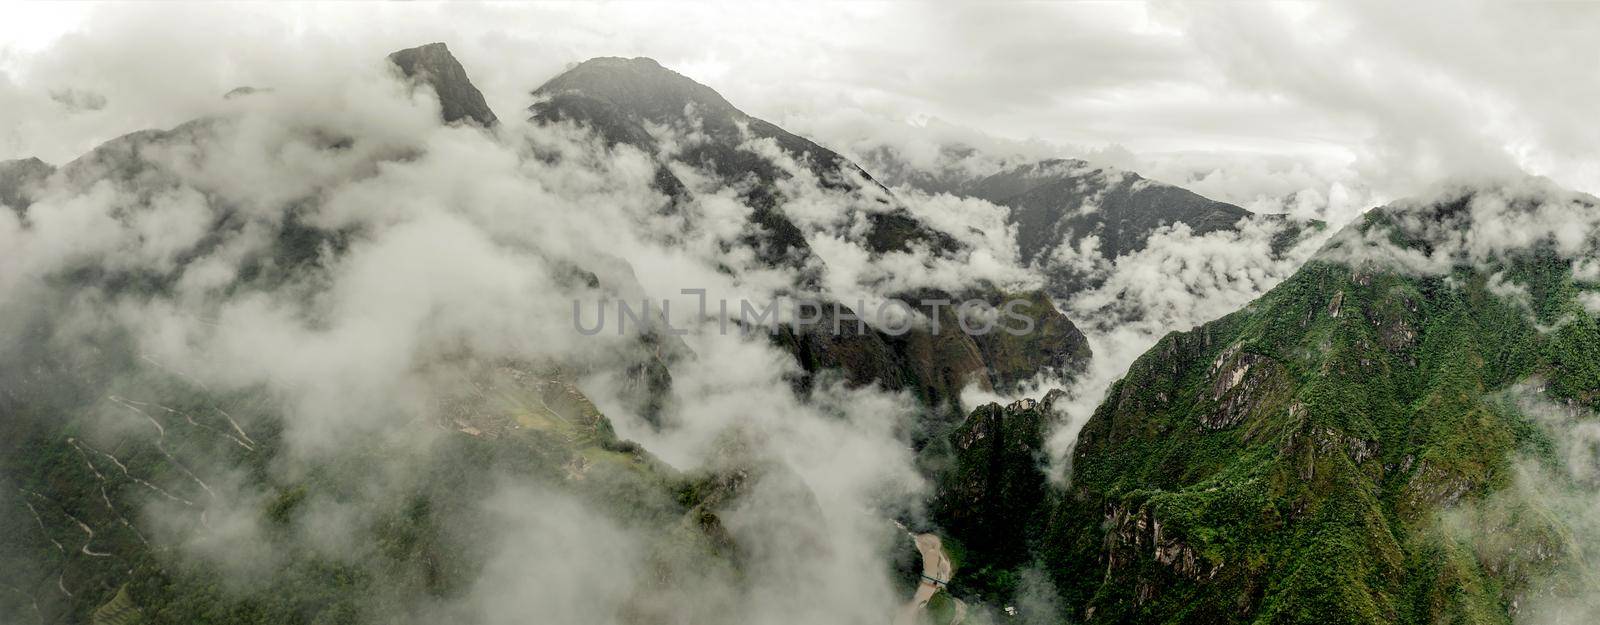 Majestic Machupicchu forested and covered with clouds, aerial view